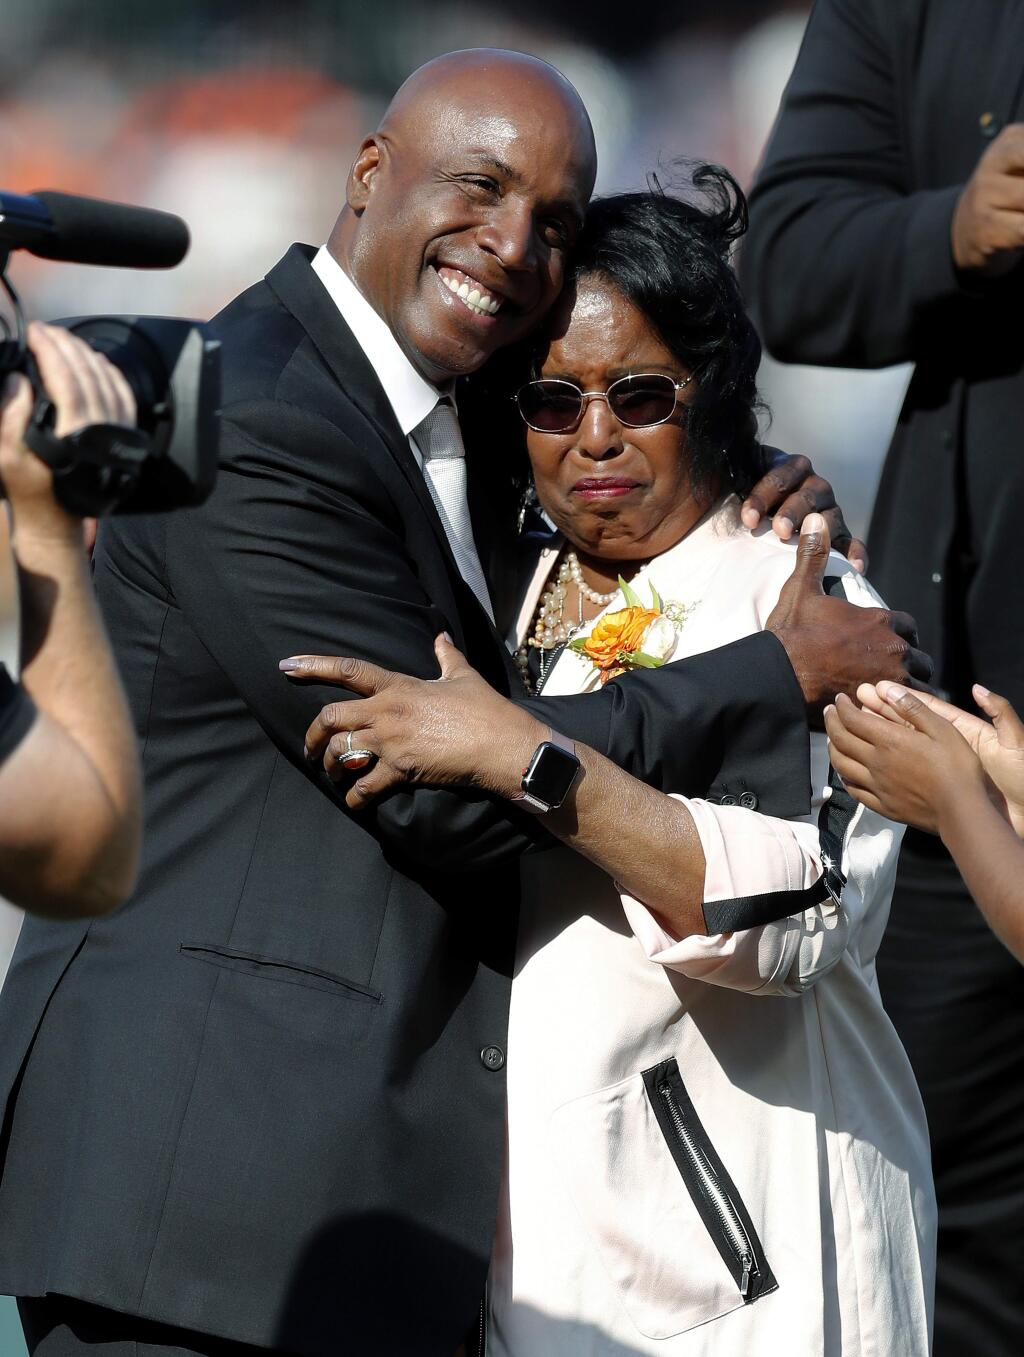 Former San Francisco Giants player Barry Bonds, left, hugs his mother, Pat, during a ceremony to retire his jersey number before a baseball game between the Giants and the Pittsburgh Pirates in San Francisco, Saturday, Aug. 11, 2018. (John G. Mabanglo/Pool Photo via AP)